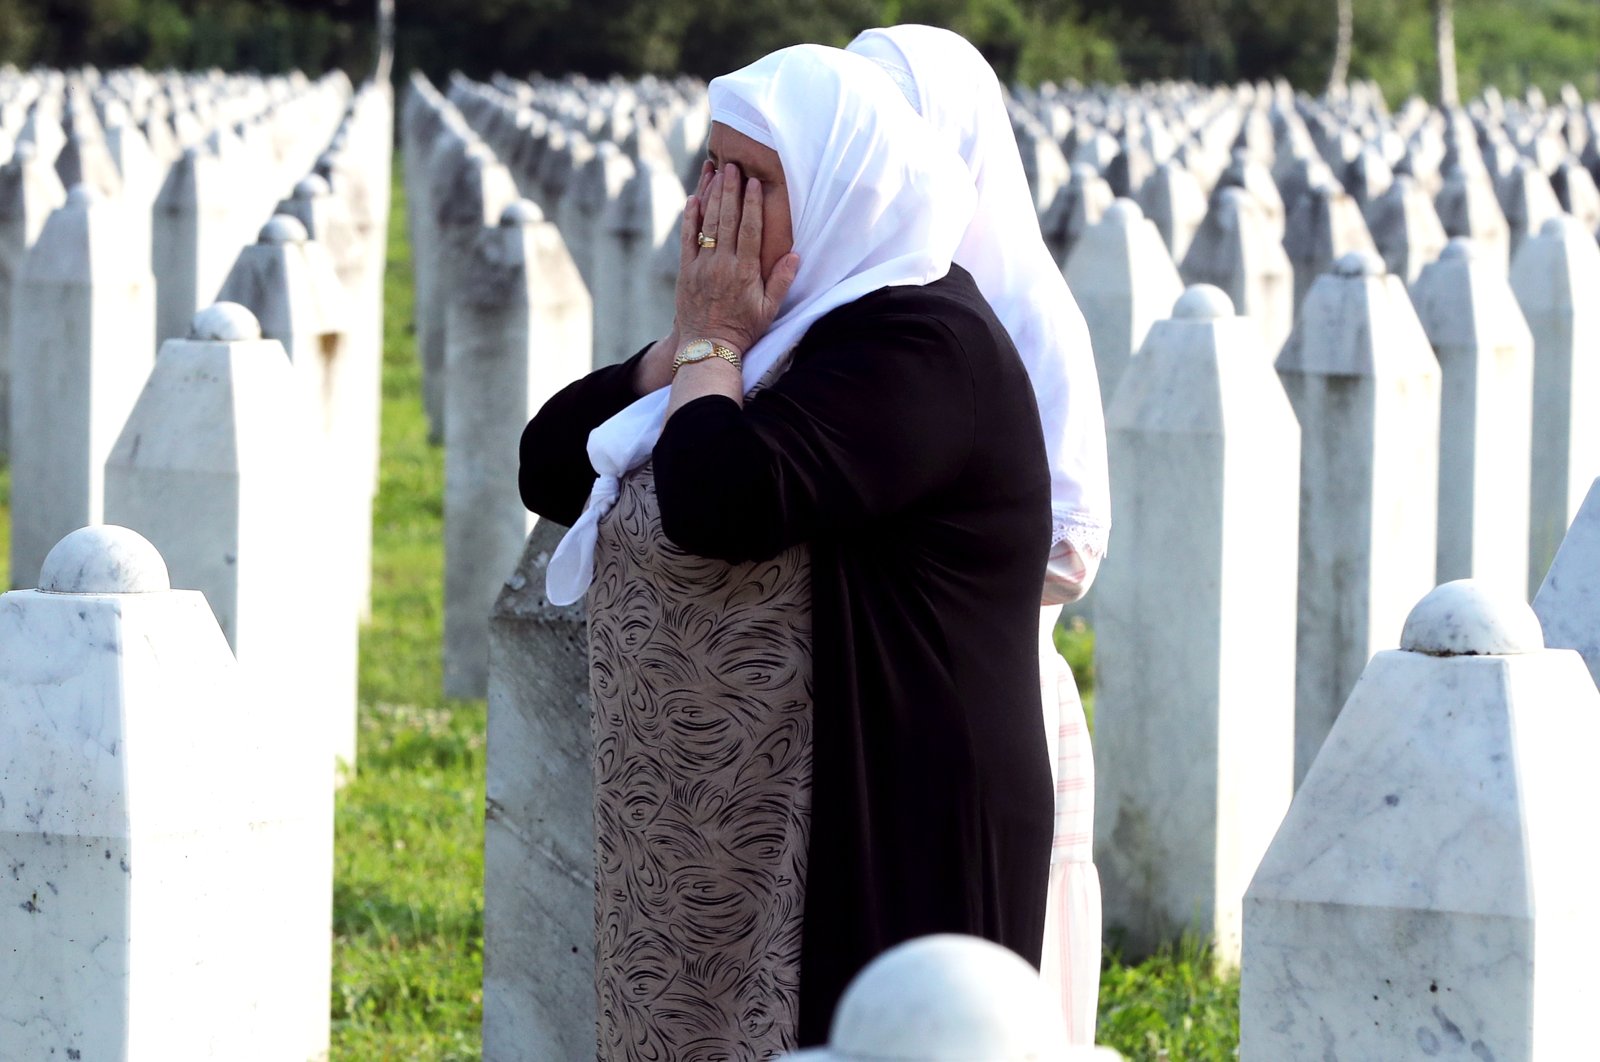 A Bosnian Muslim woman weeps during a funeral ceremony for 30 newly identified Muslim Bosnian victims, at the Potocari Memorial Center and Cemetery, in Srebrenica, Bosnia-Herzegovina, July 11, 2023. (EPA Photo)